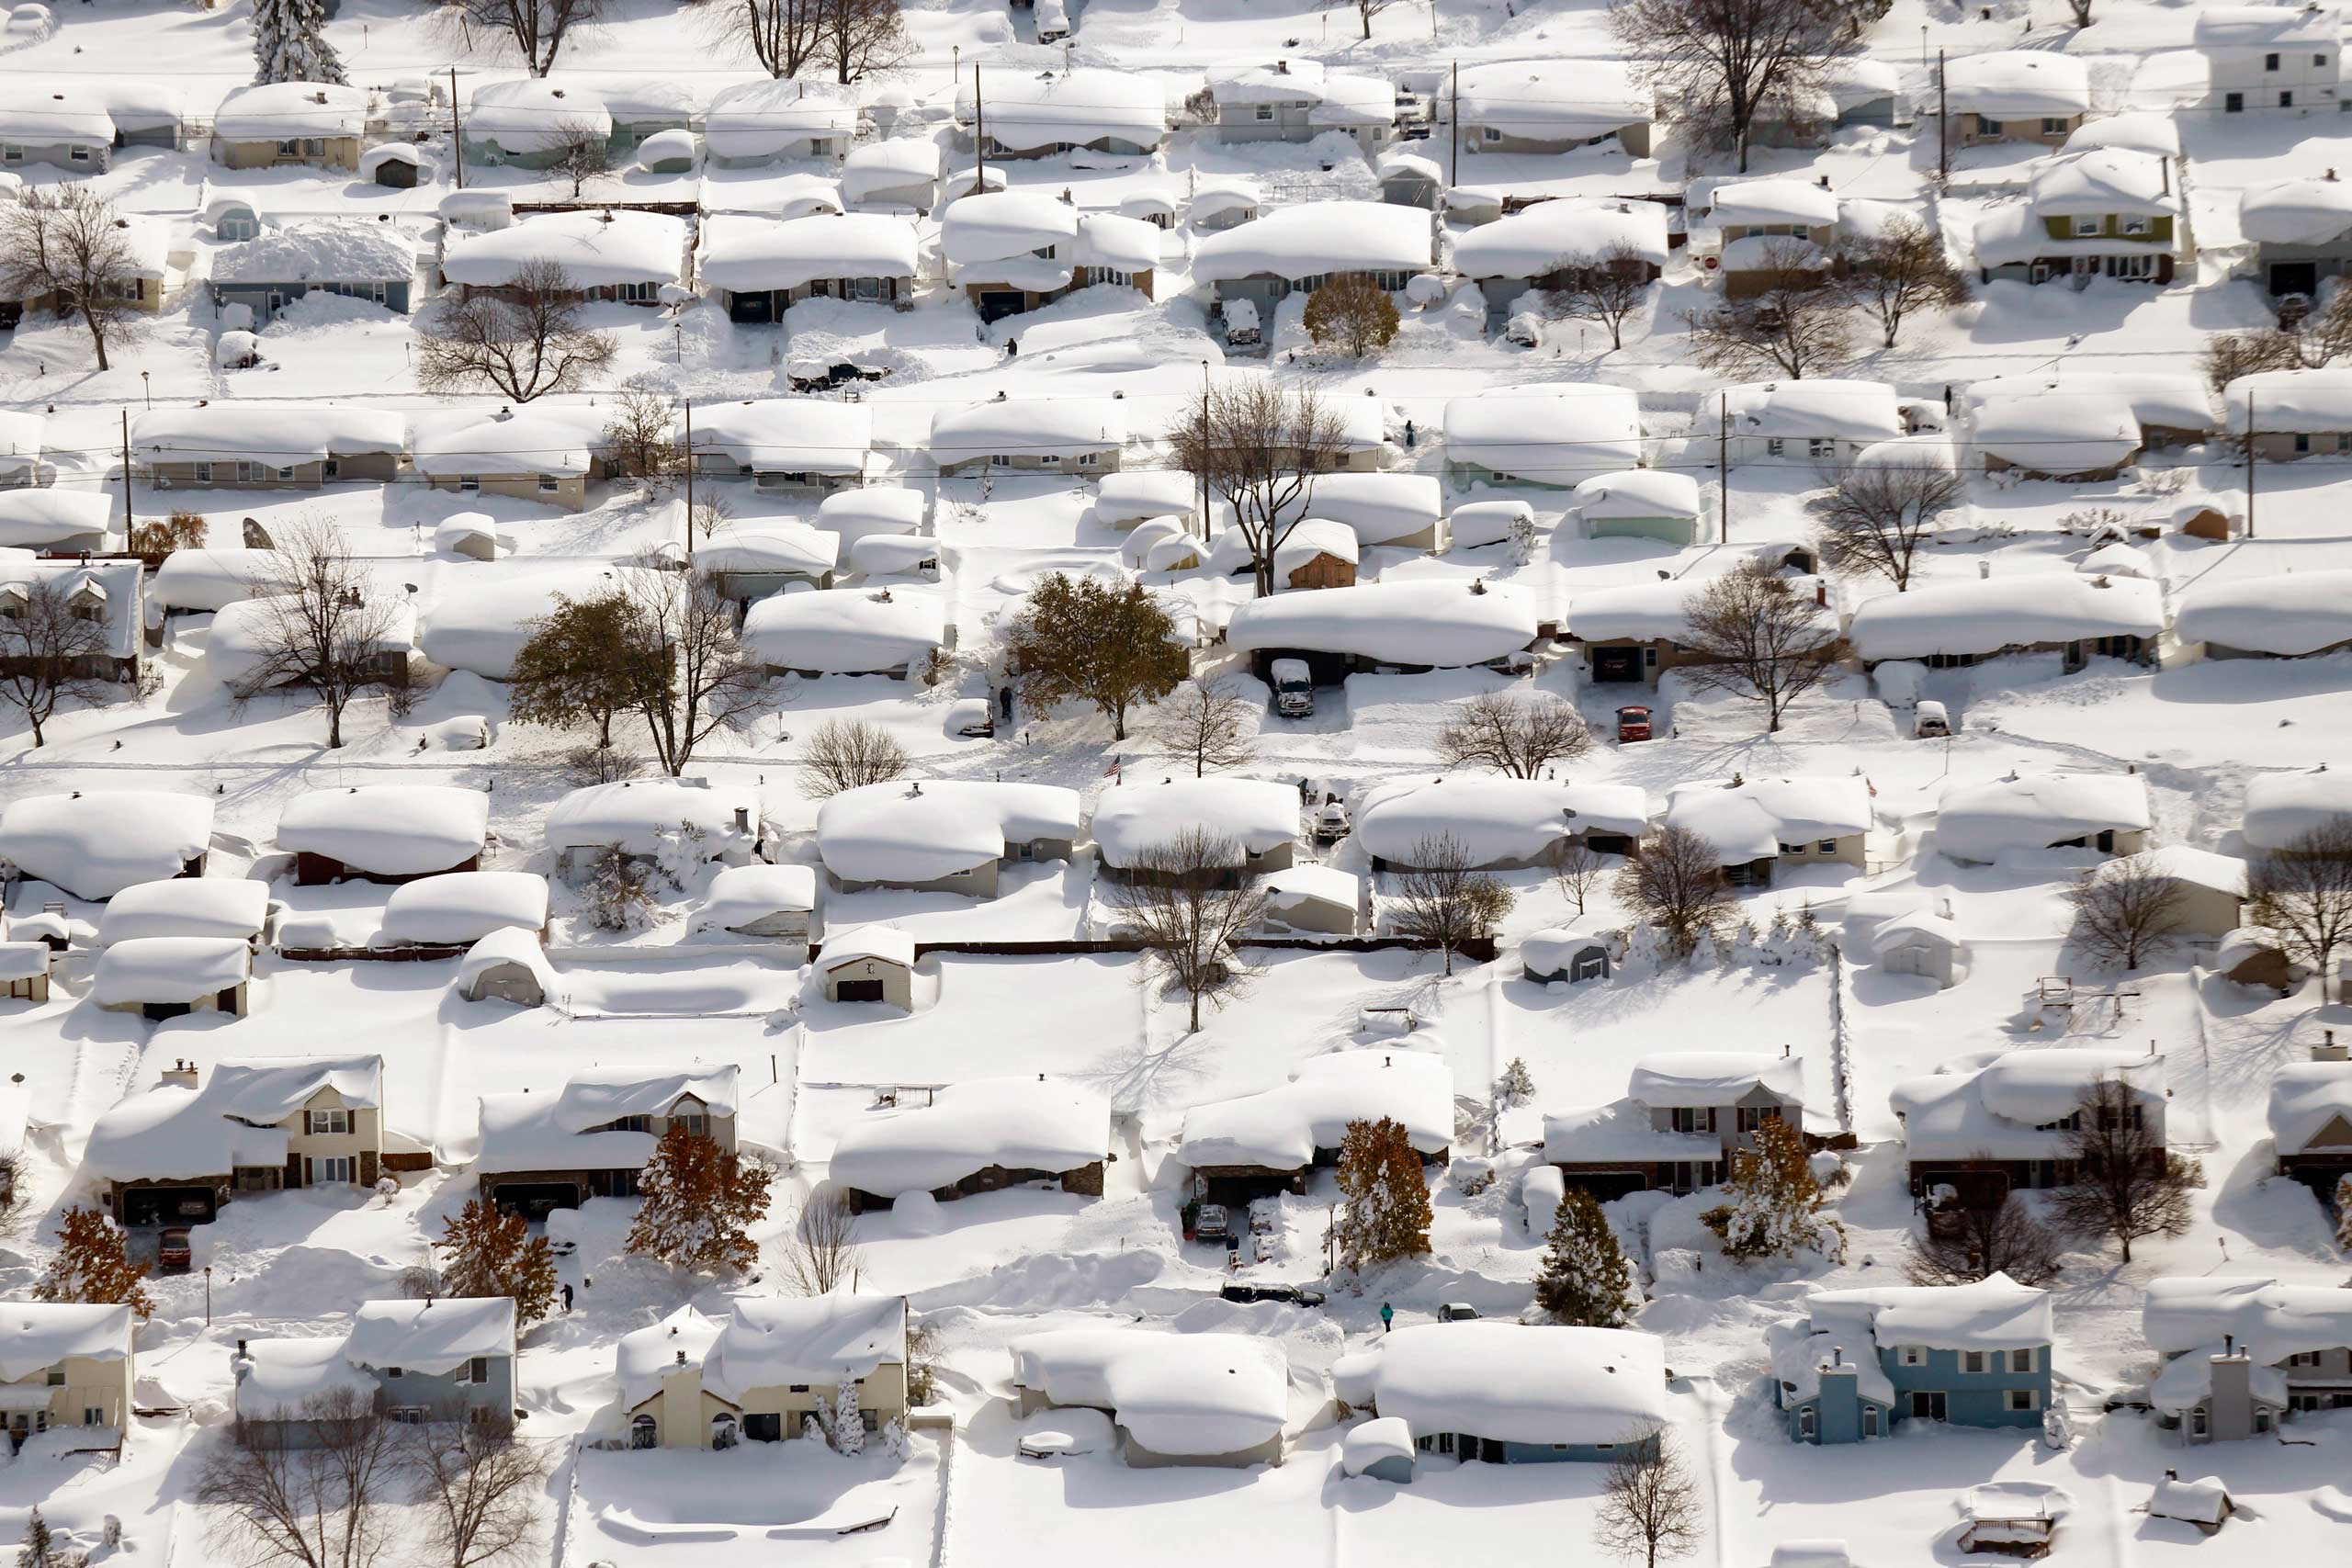 Homes are covered in snow in West Seneca, N.Y. on Nov. 19, 2014. The Buffalo area found itself buried under as much as 5½ feet of snow with another lake-effect storm expected to bring 2 to 3 more feet.